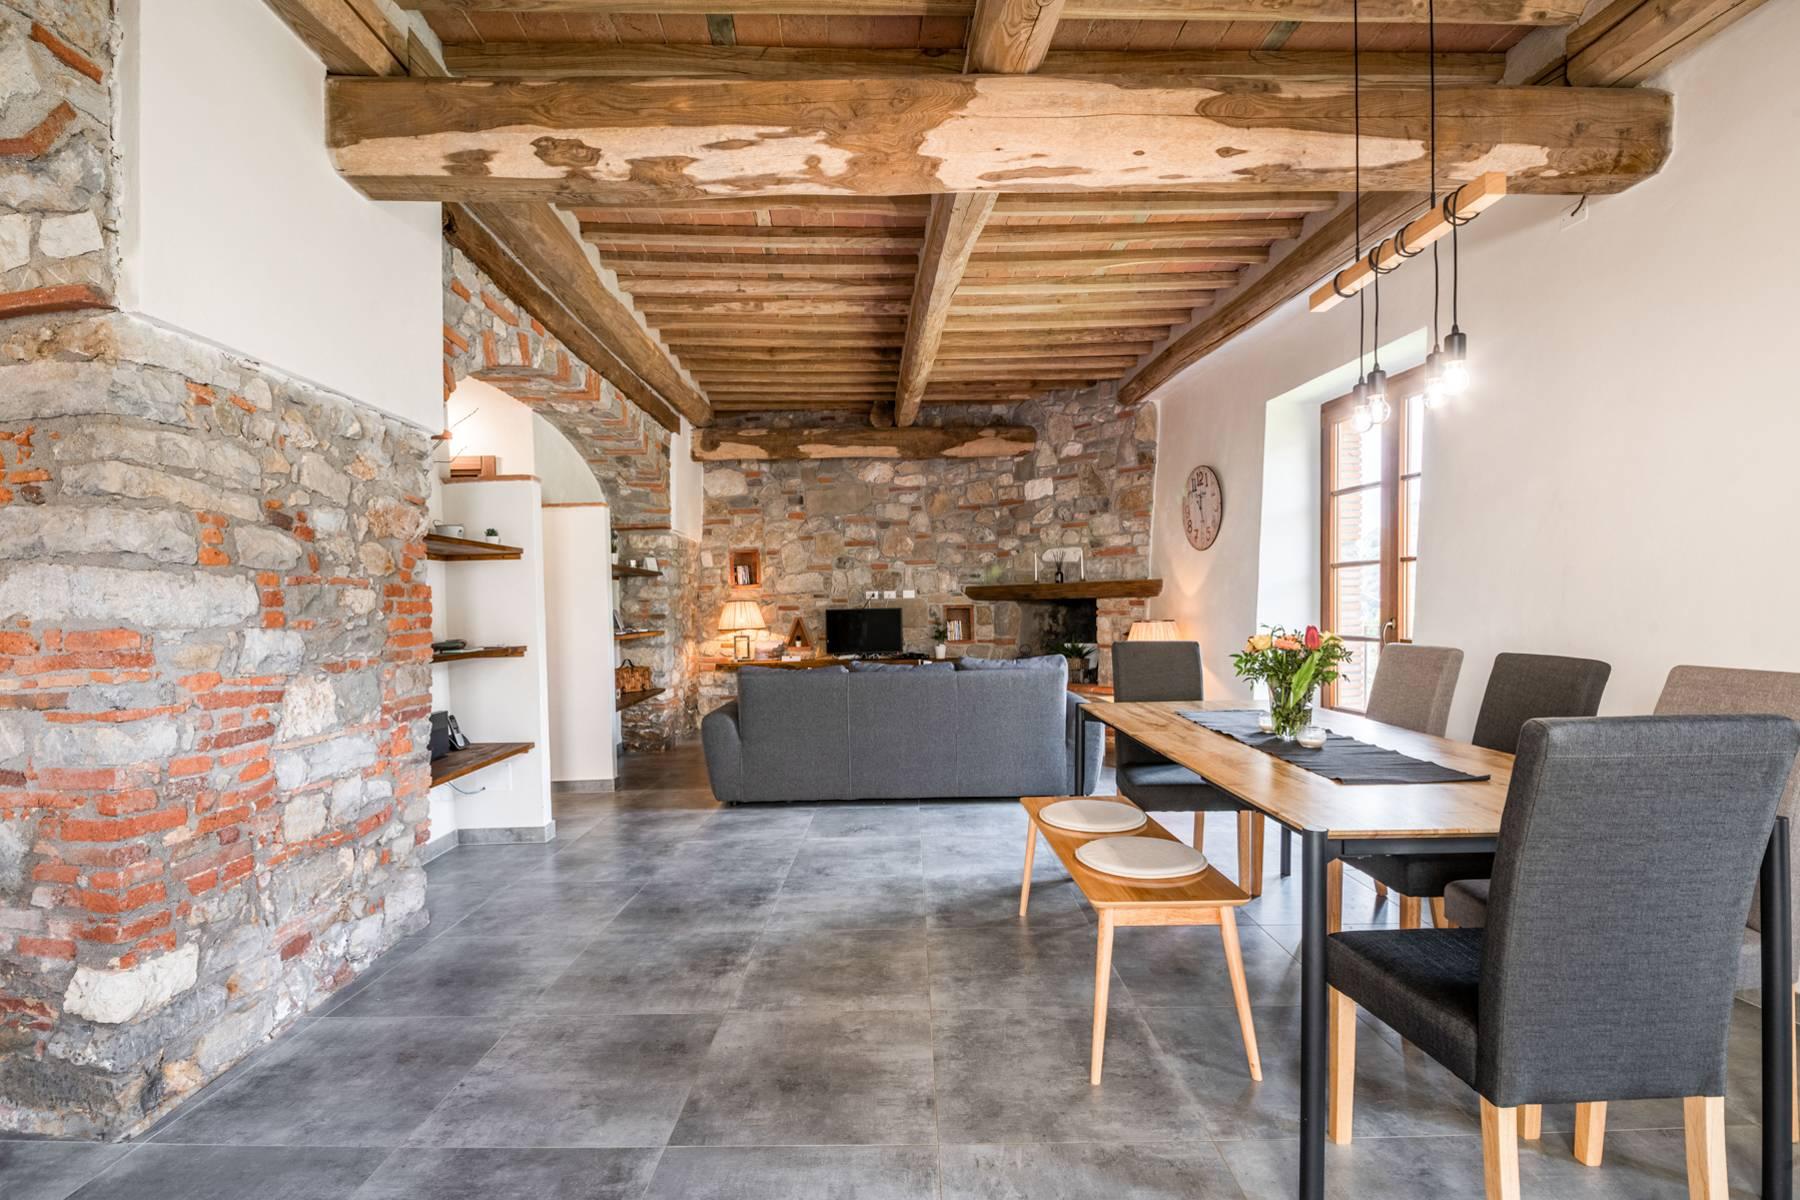 A lovingly restored semi-detached house on the hills of Lucca - 8